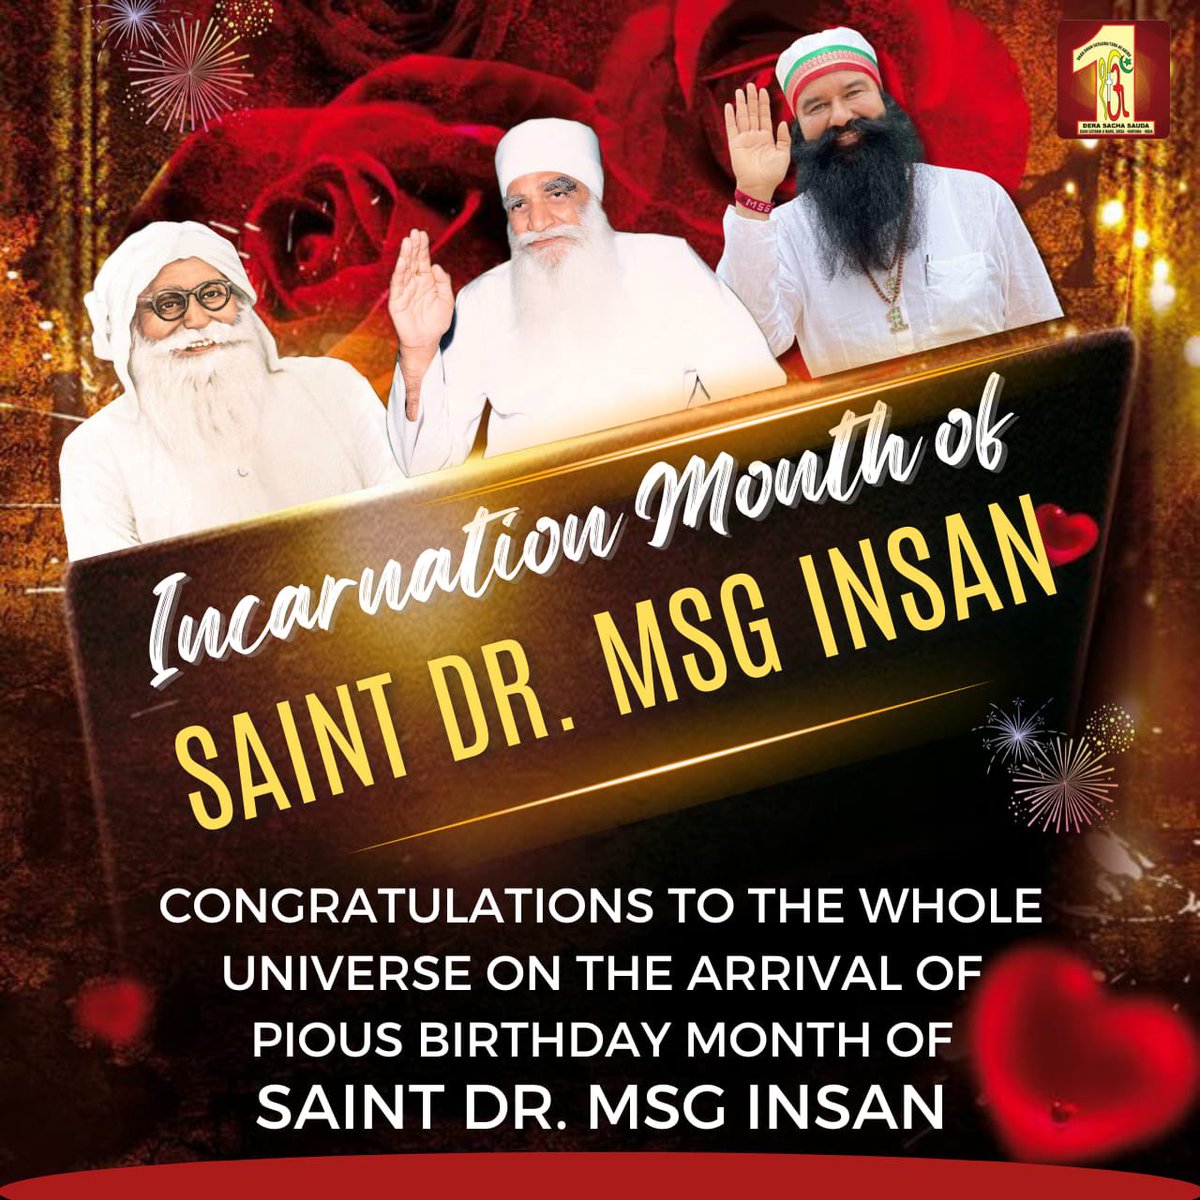 Let the festivities begin! Saint Dr. MSG's incarnation month is a carnival of love, devotion, joy, and boundless grace. With immense joy, we extend our heartfelt greetings to Guruji, the ultimate source of our inspiration and light. Let's revel in His divine teachings and radiate